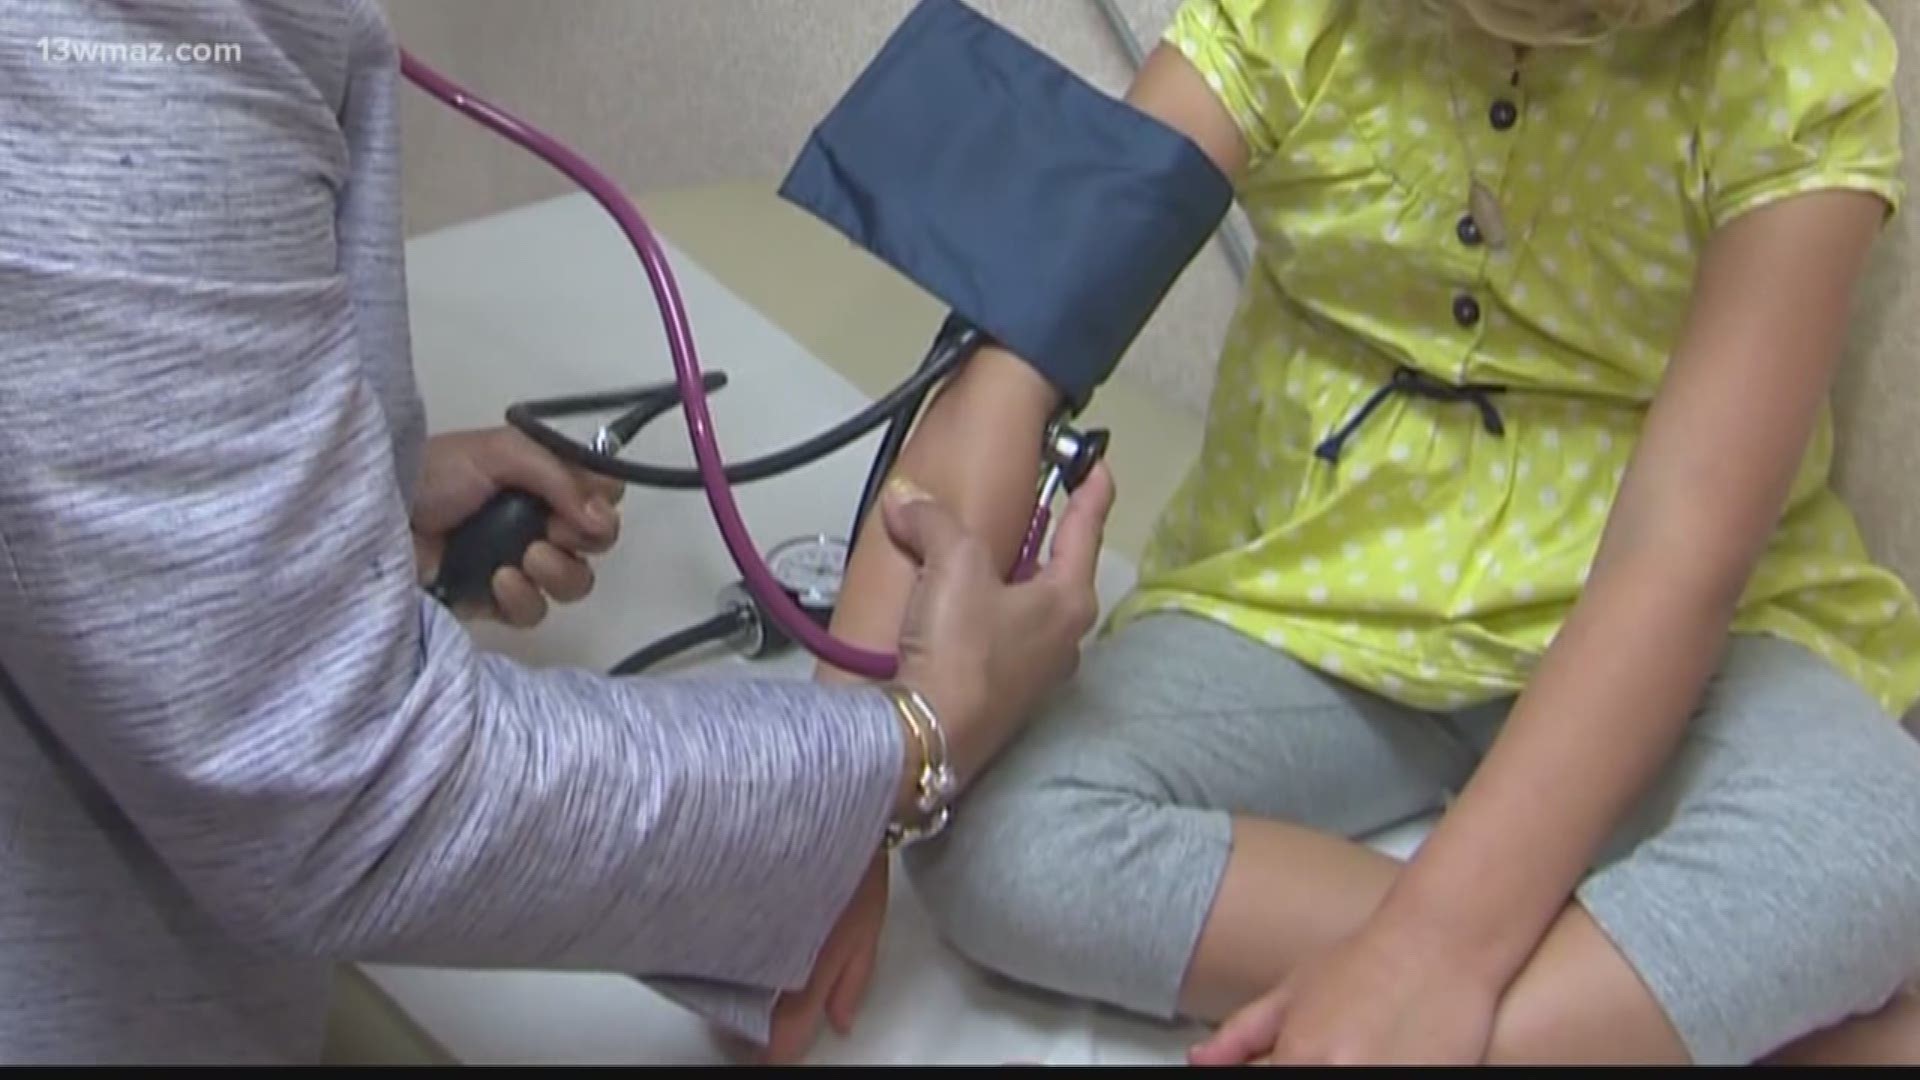 Pediatricians are answering a lot of questions from parents wondering if children are more likely to contract the sickness.